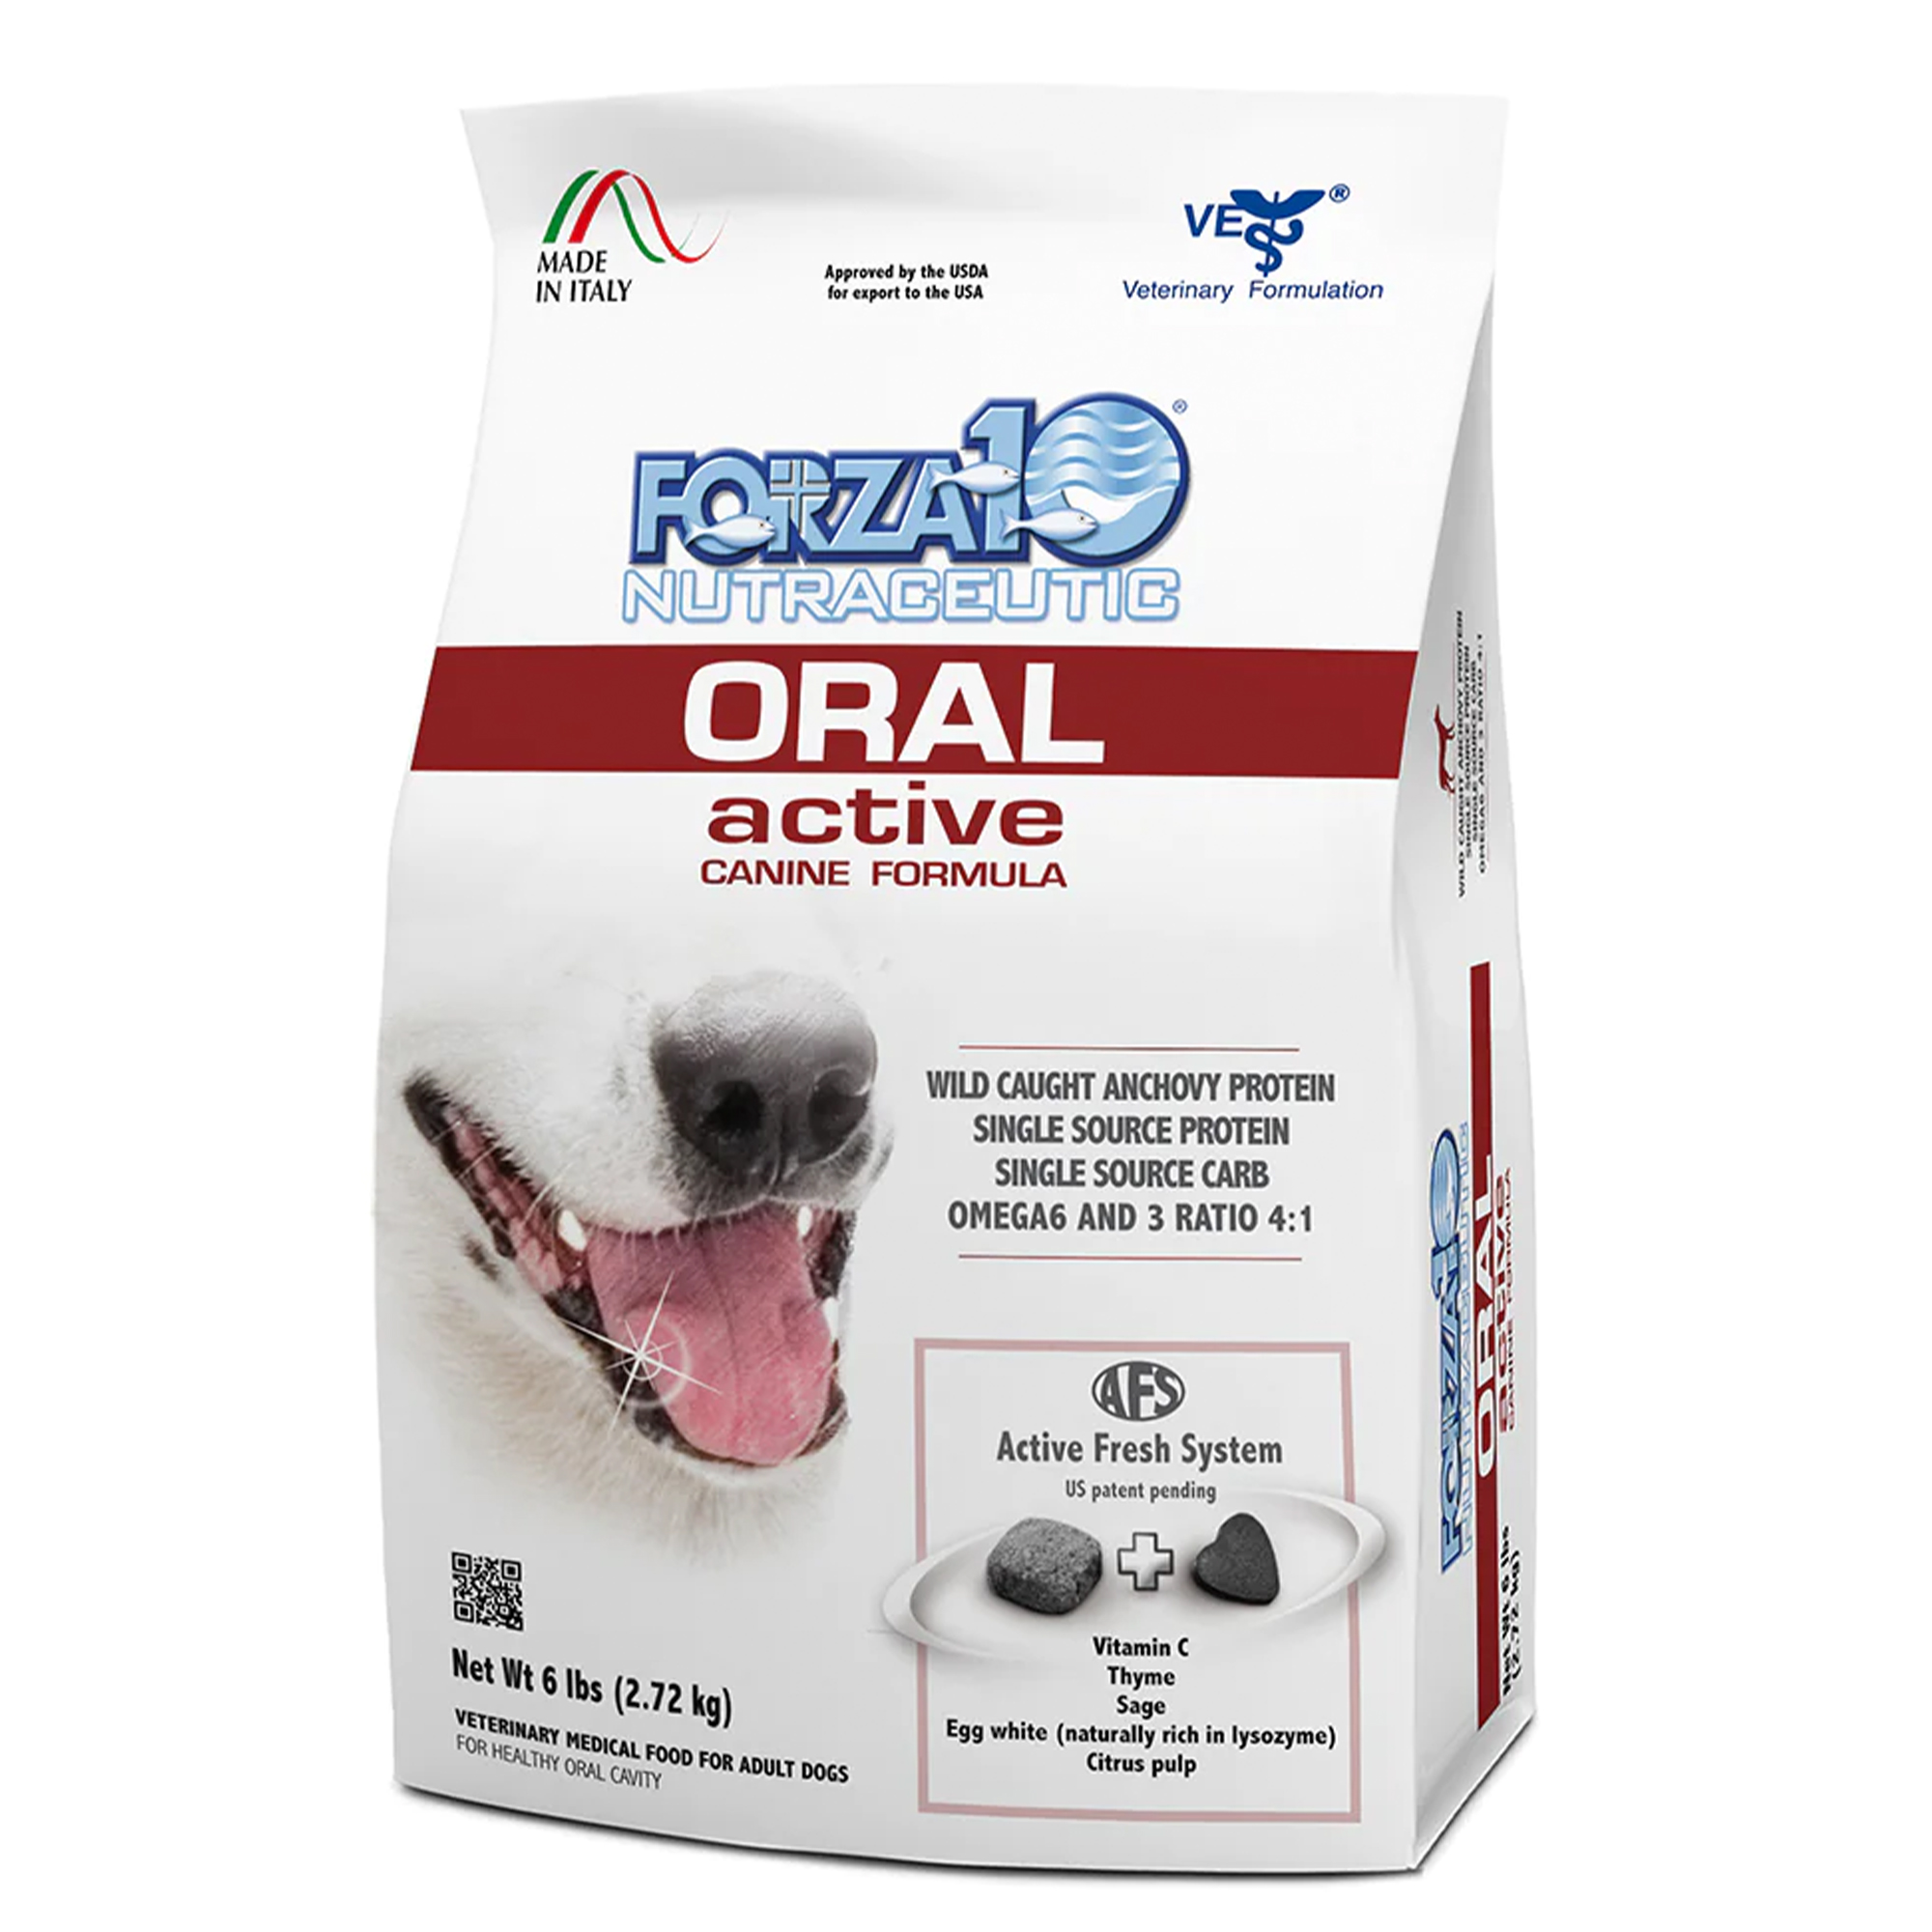 Forza10 Nutraceutic Active Oral Support Diet Dry Dog Food Usage